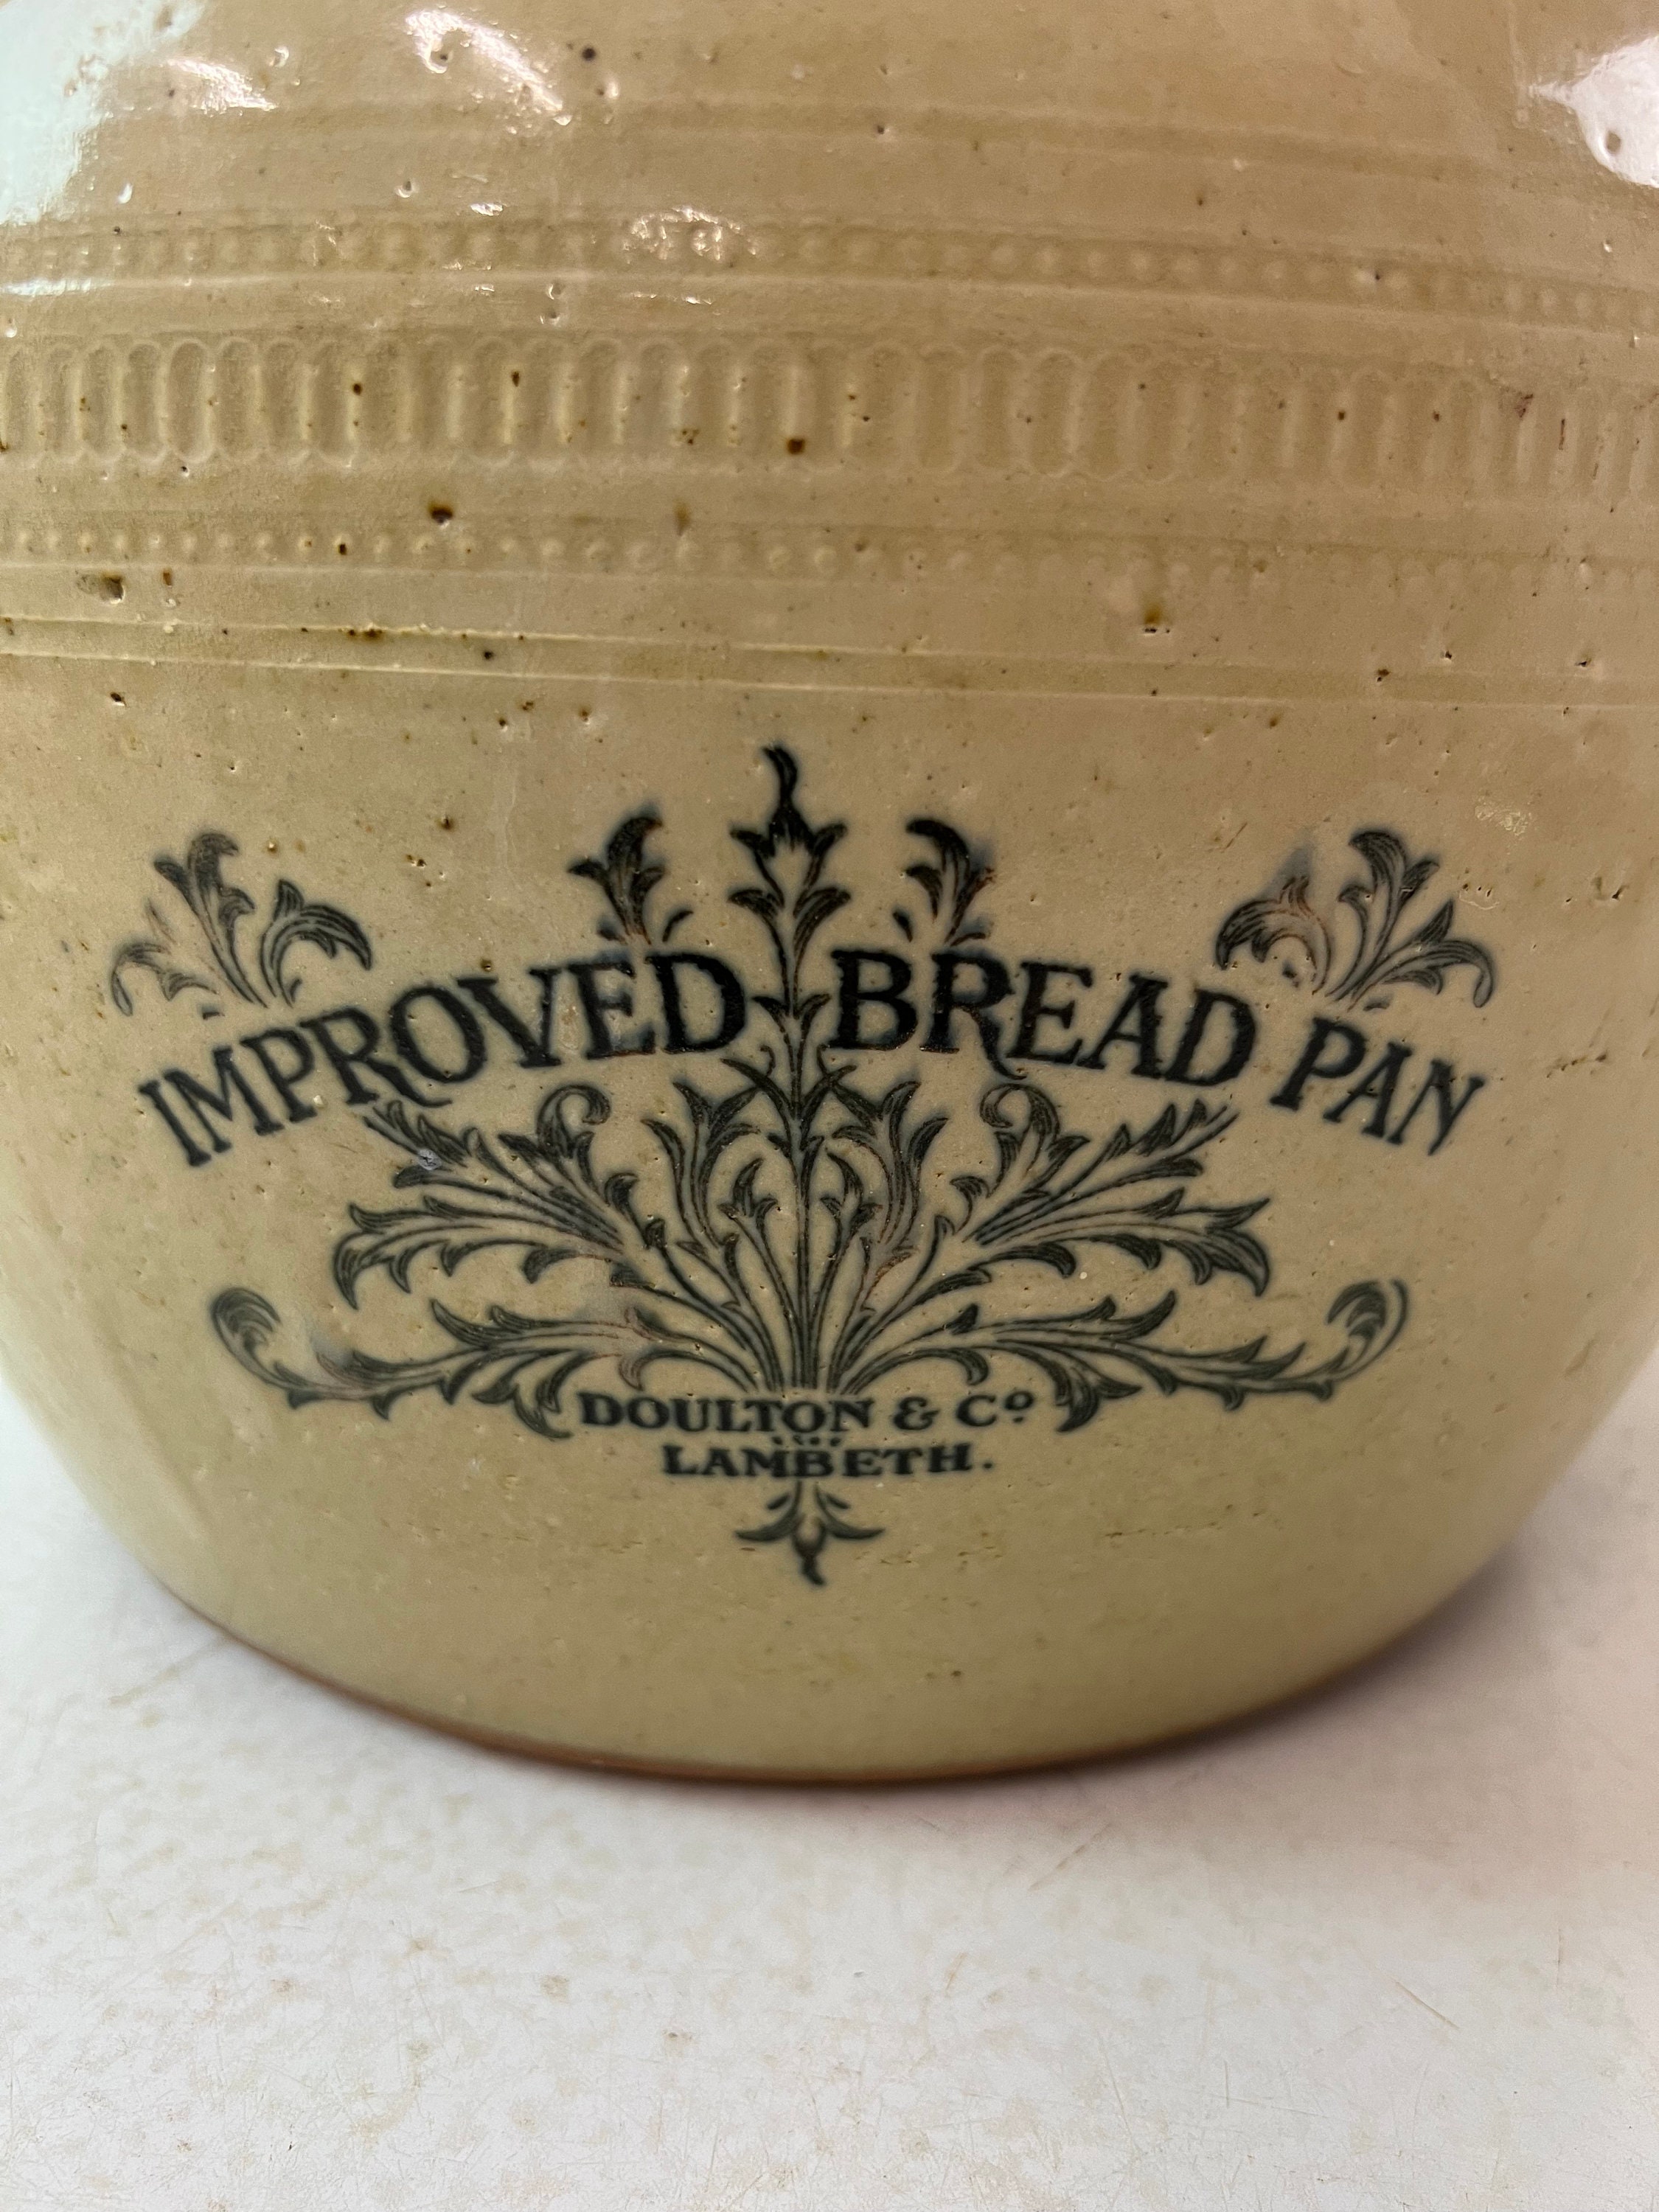 Bread Baker Pottery Bread Crock, 12 Bread Recipes Included Tri-color Glaze  Ceramic Baker by Neal Pottery in Stock and Ready to Ship 